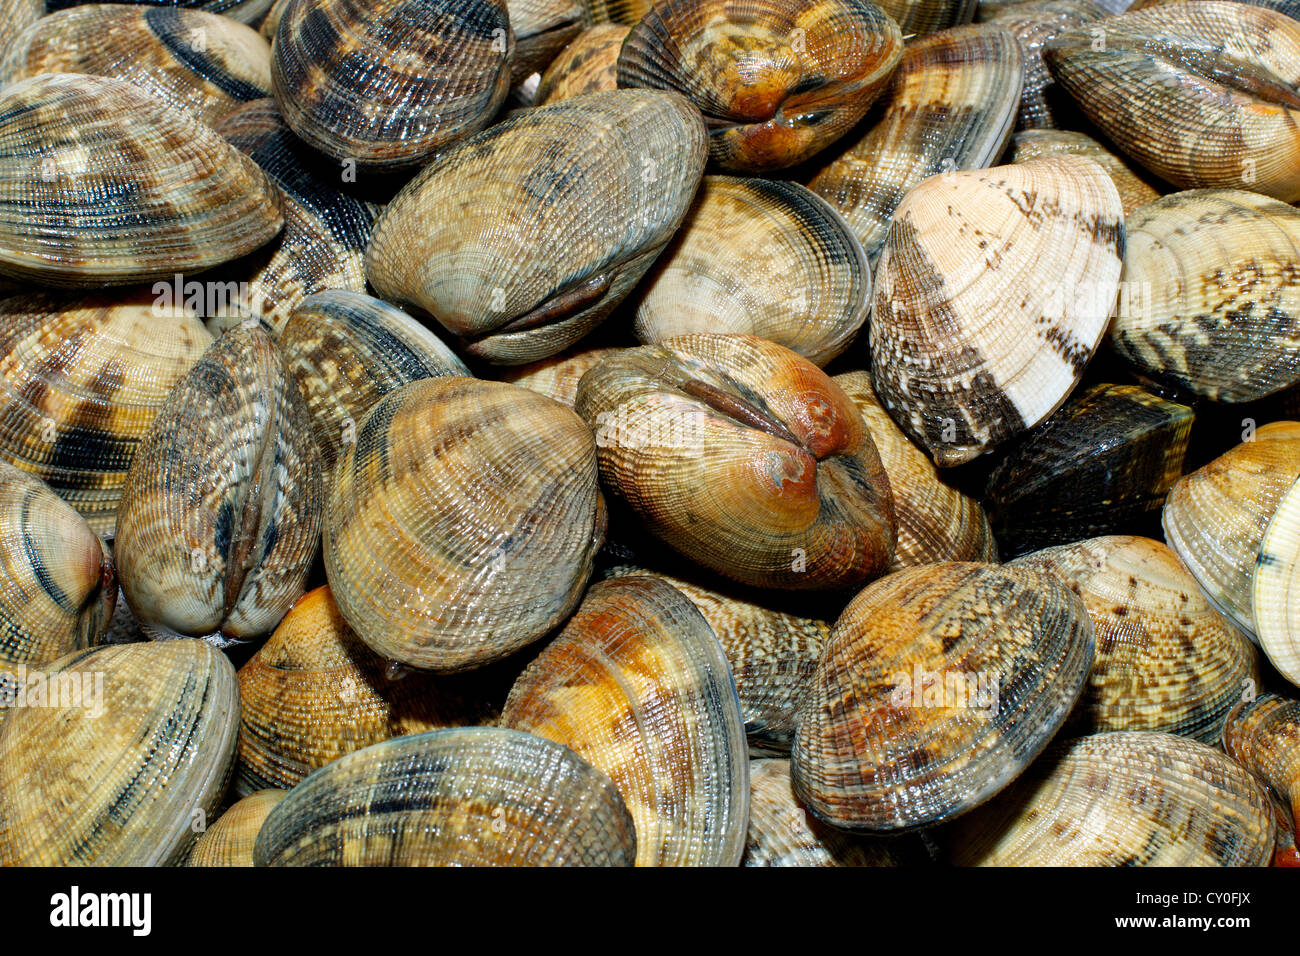 Clams Close-up, for spagetti vongole Stock Photo